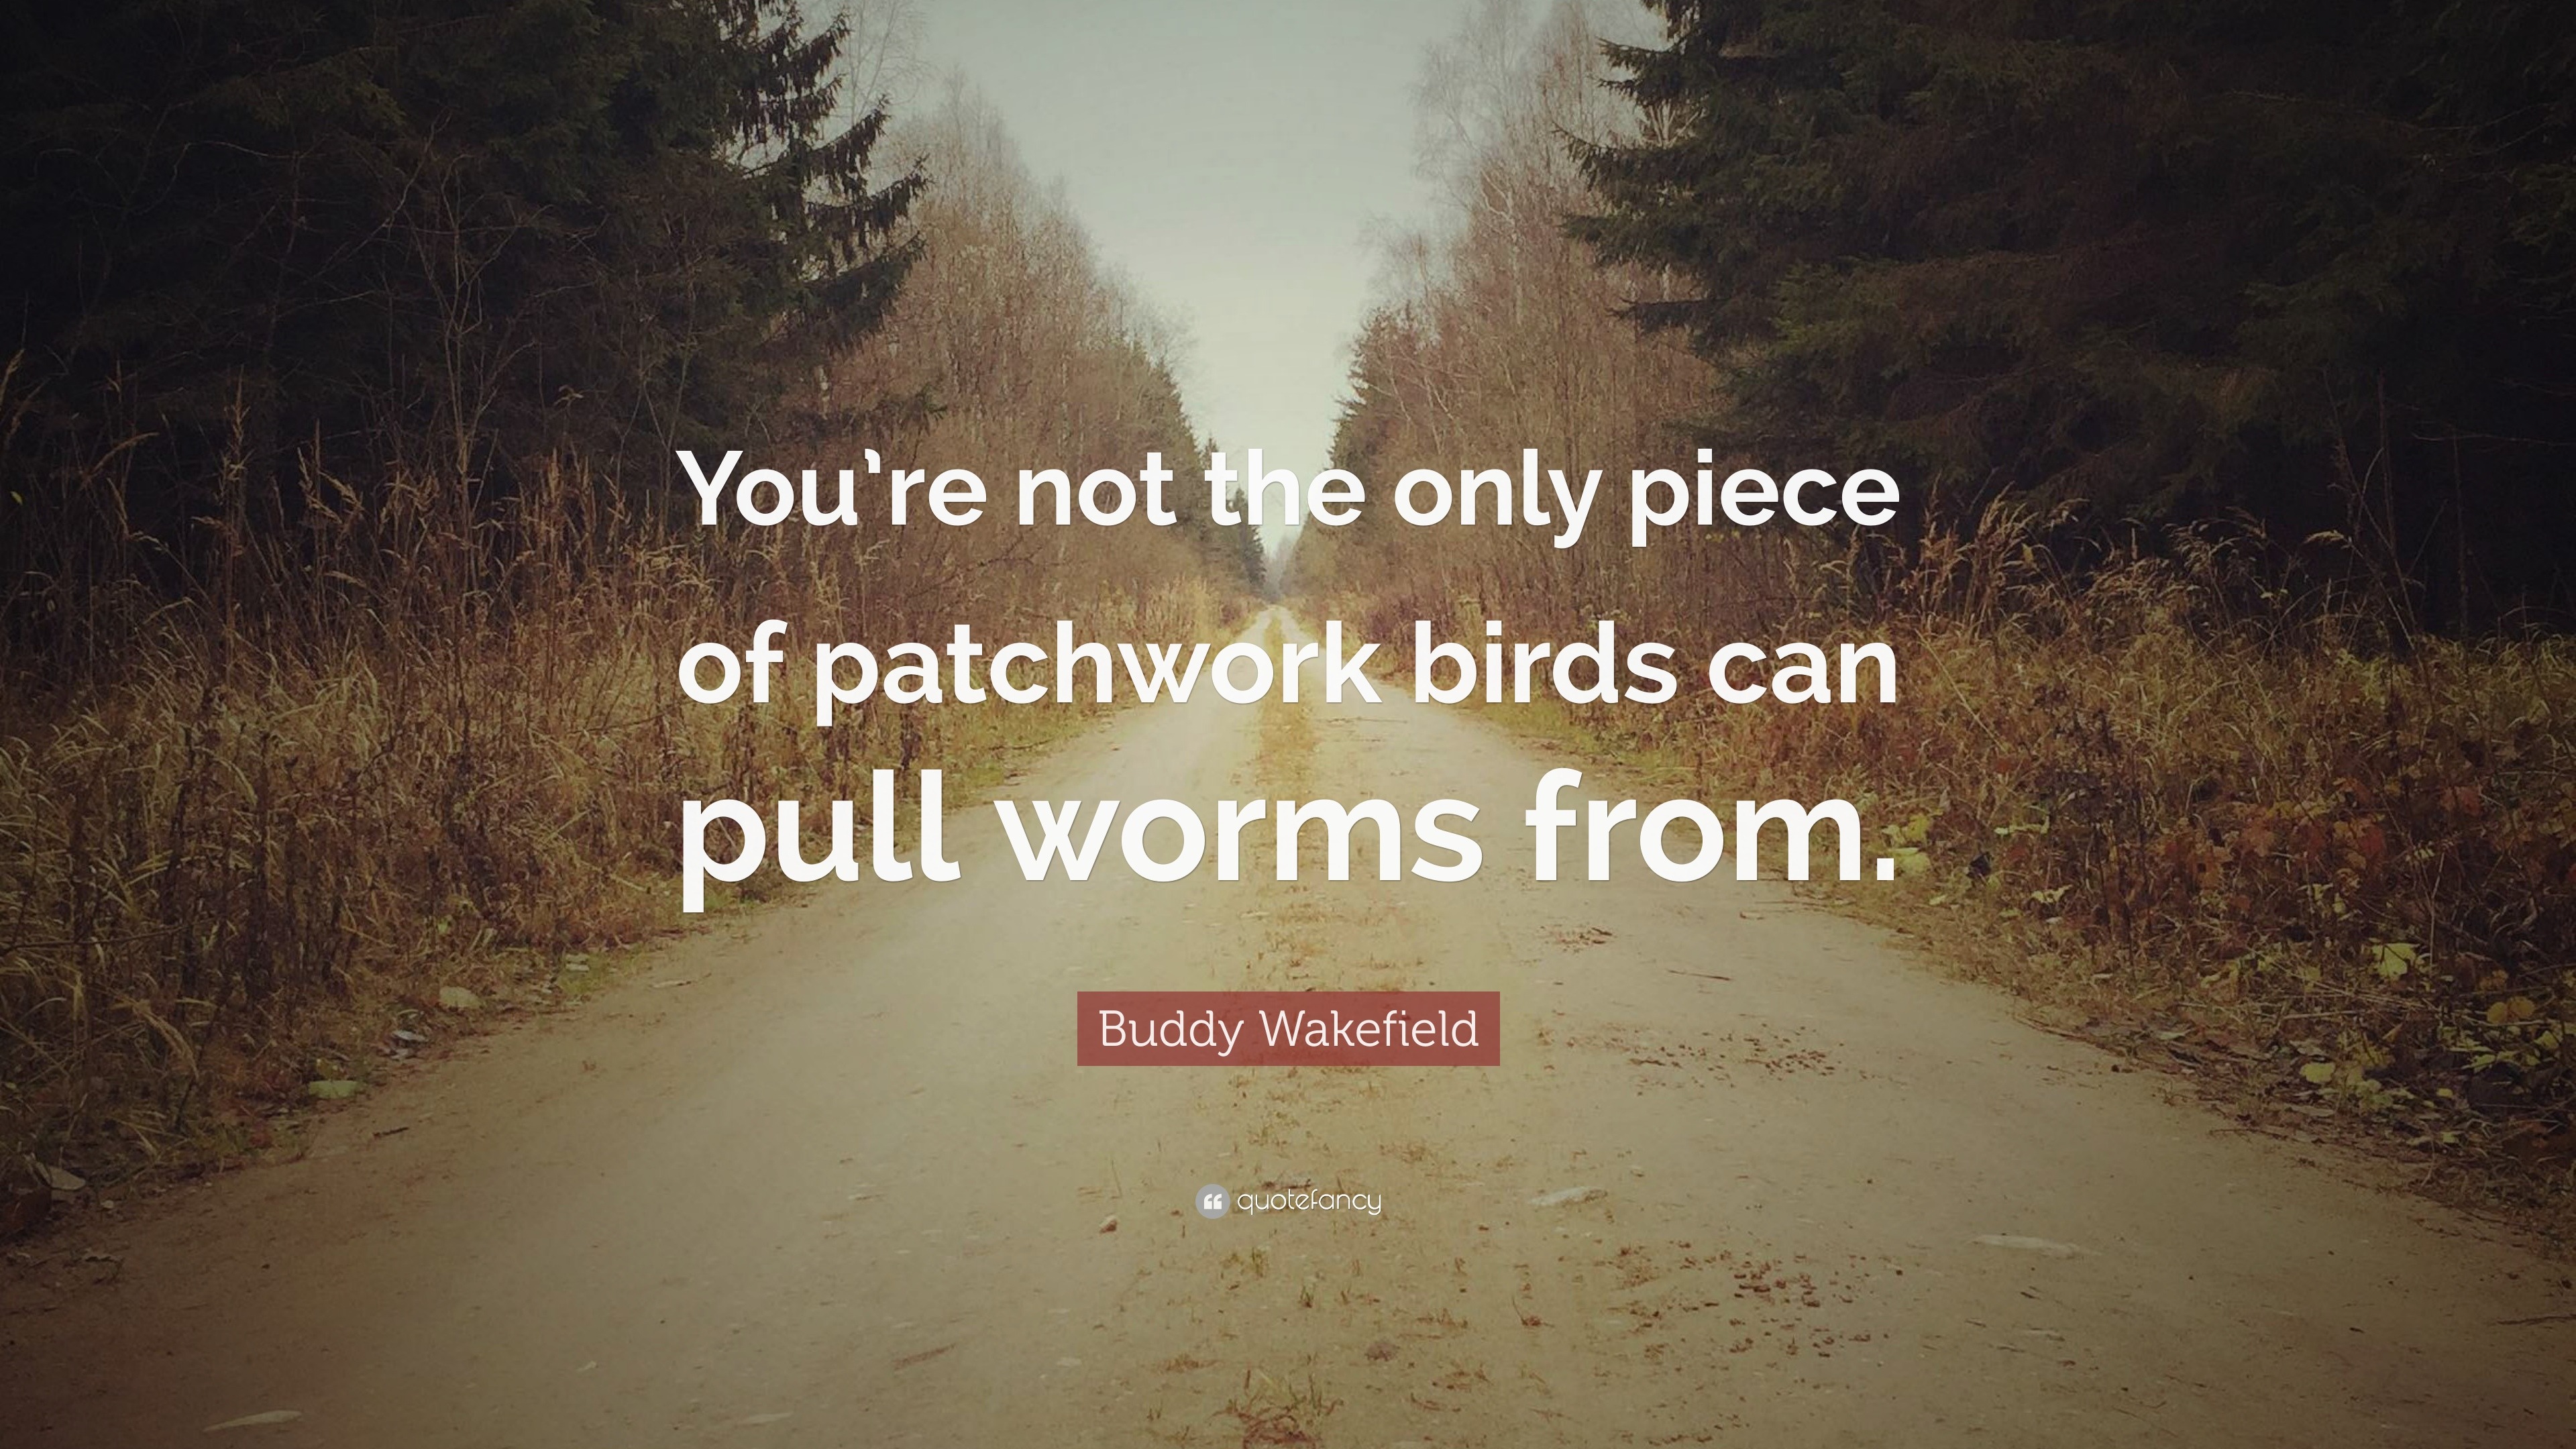 Buddy Wakefield Quote: “You’re not the only piece of patchwork birds ...